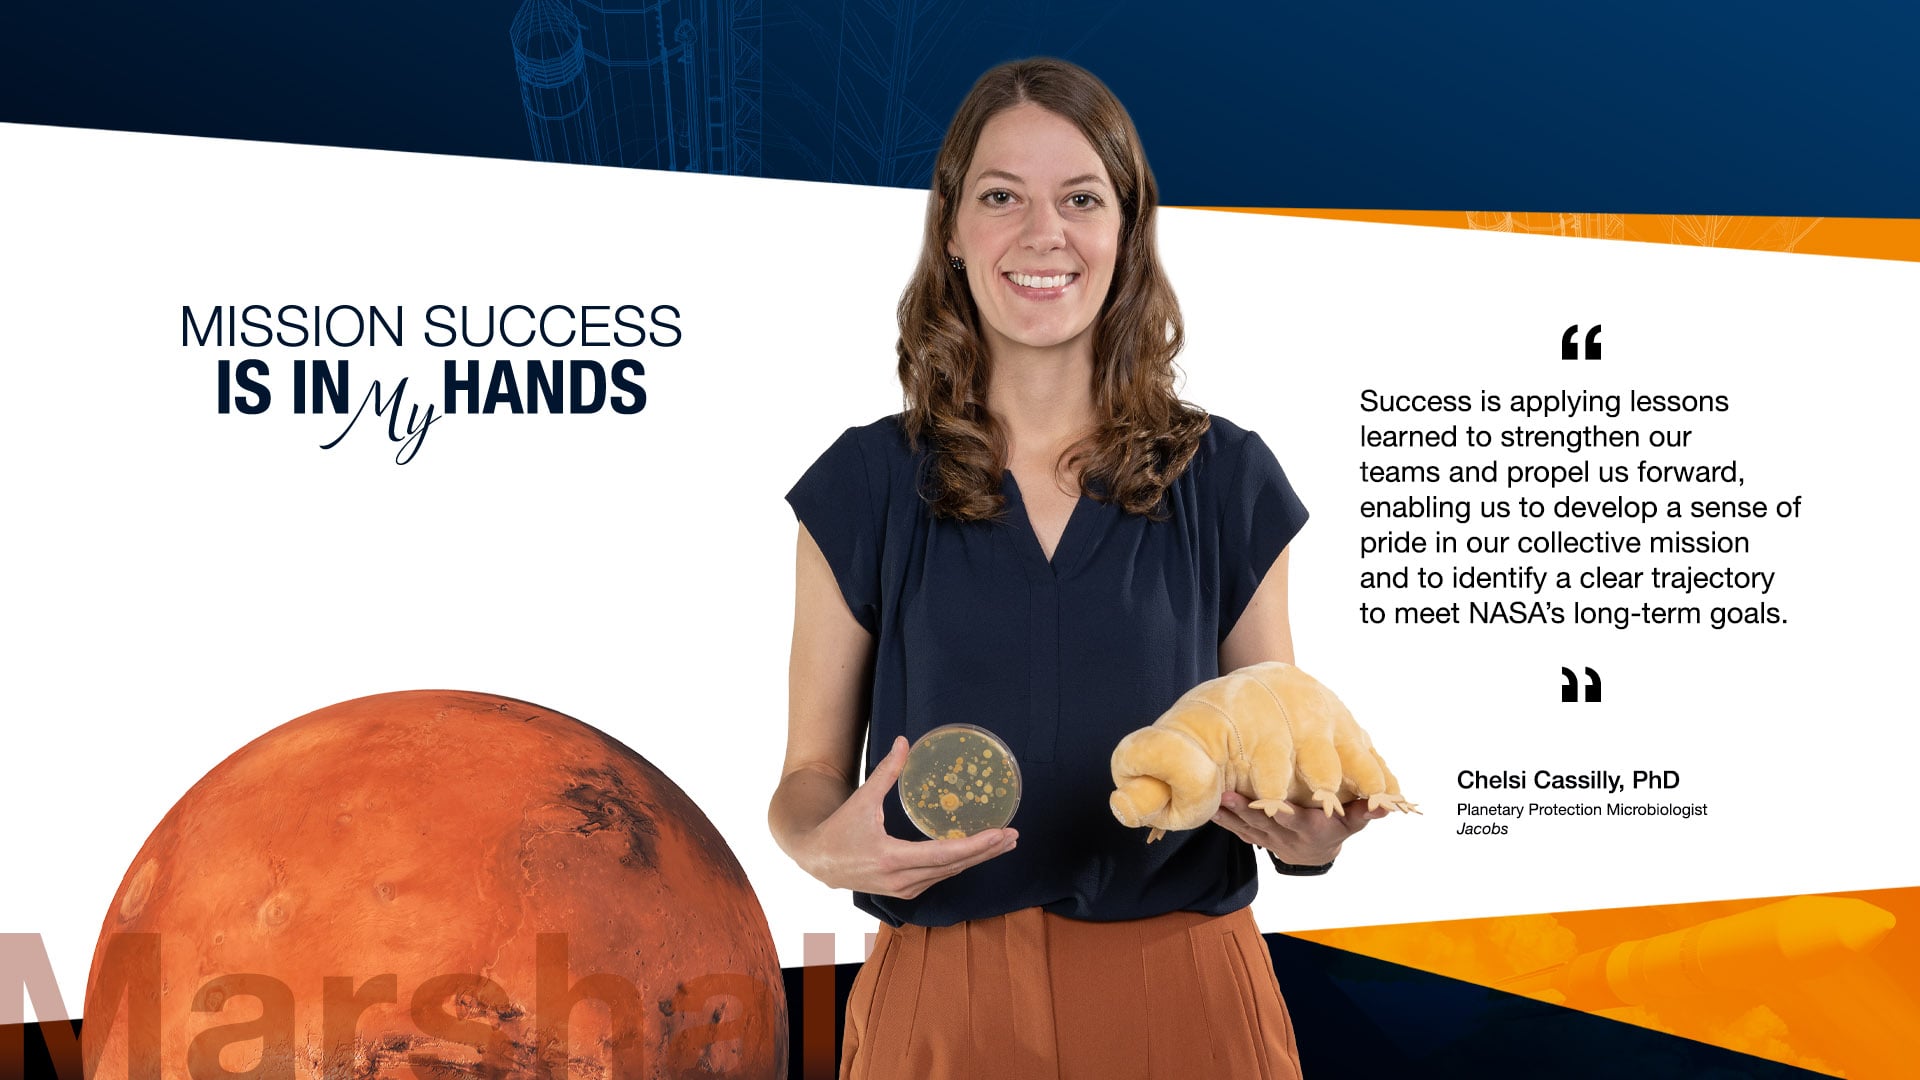 Chelsi Cassilly is a planetary protection microbiologist working at NASA’s Marshall Space Flight Center.